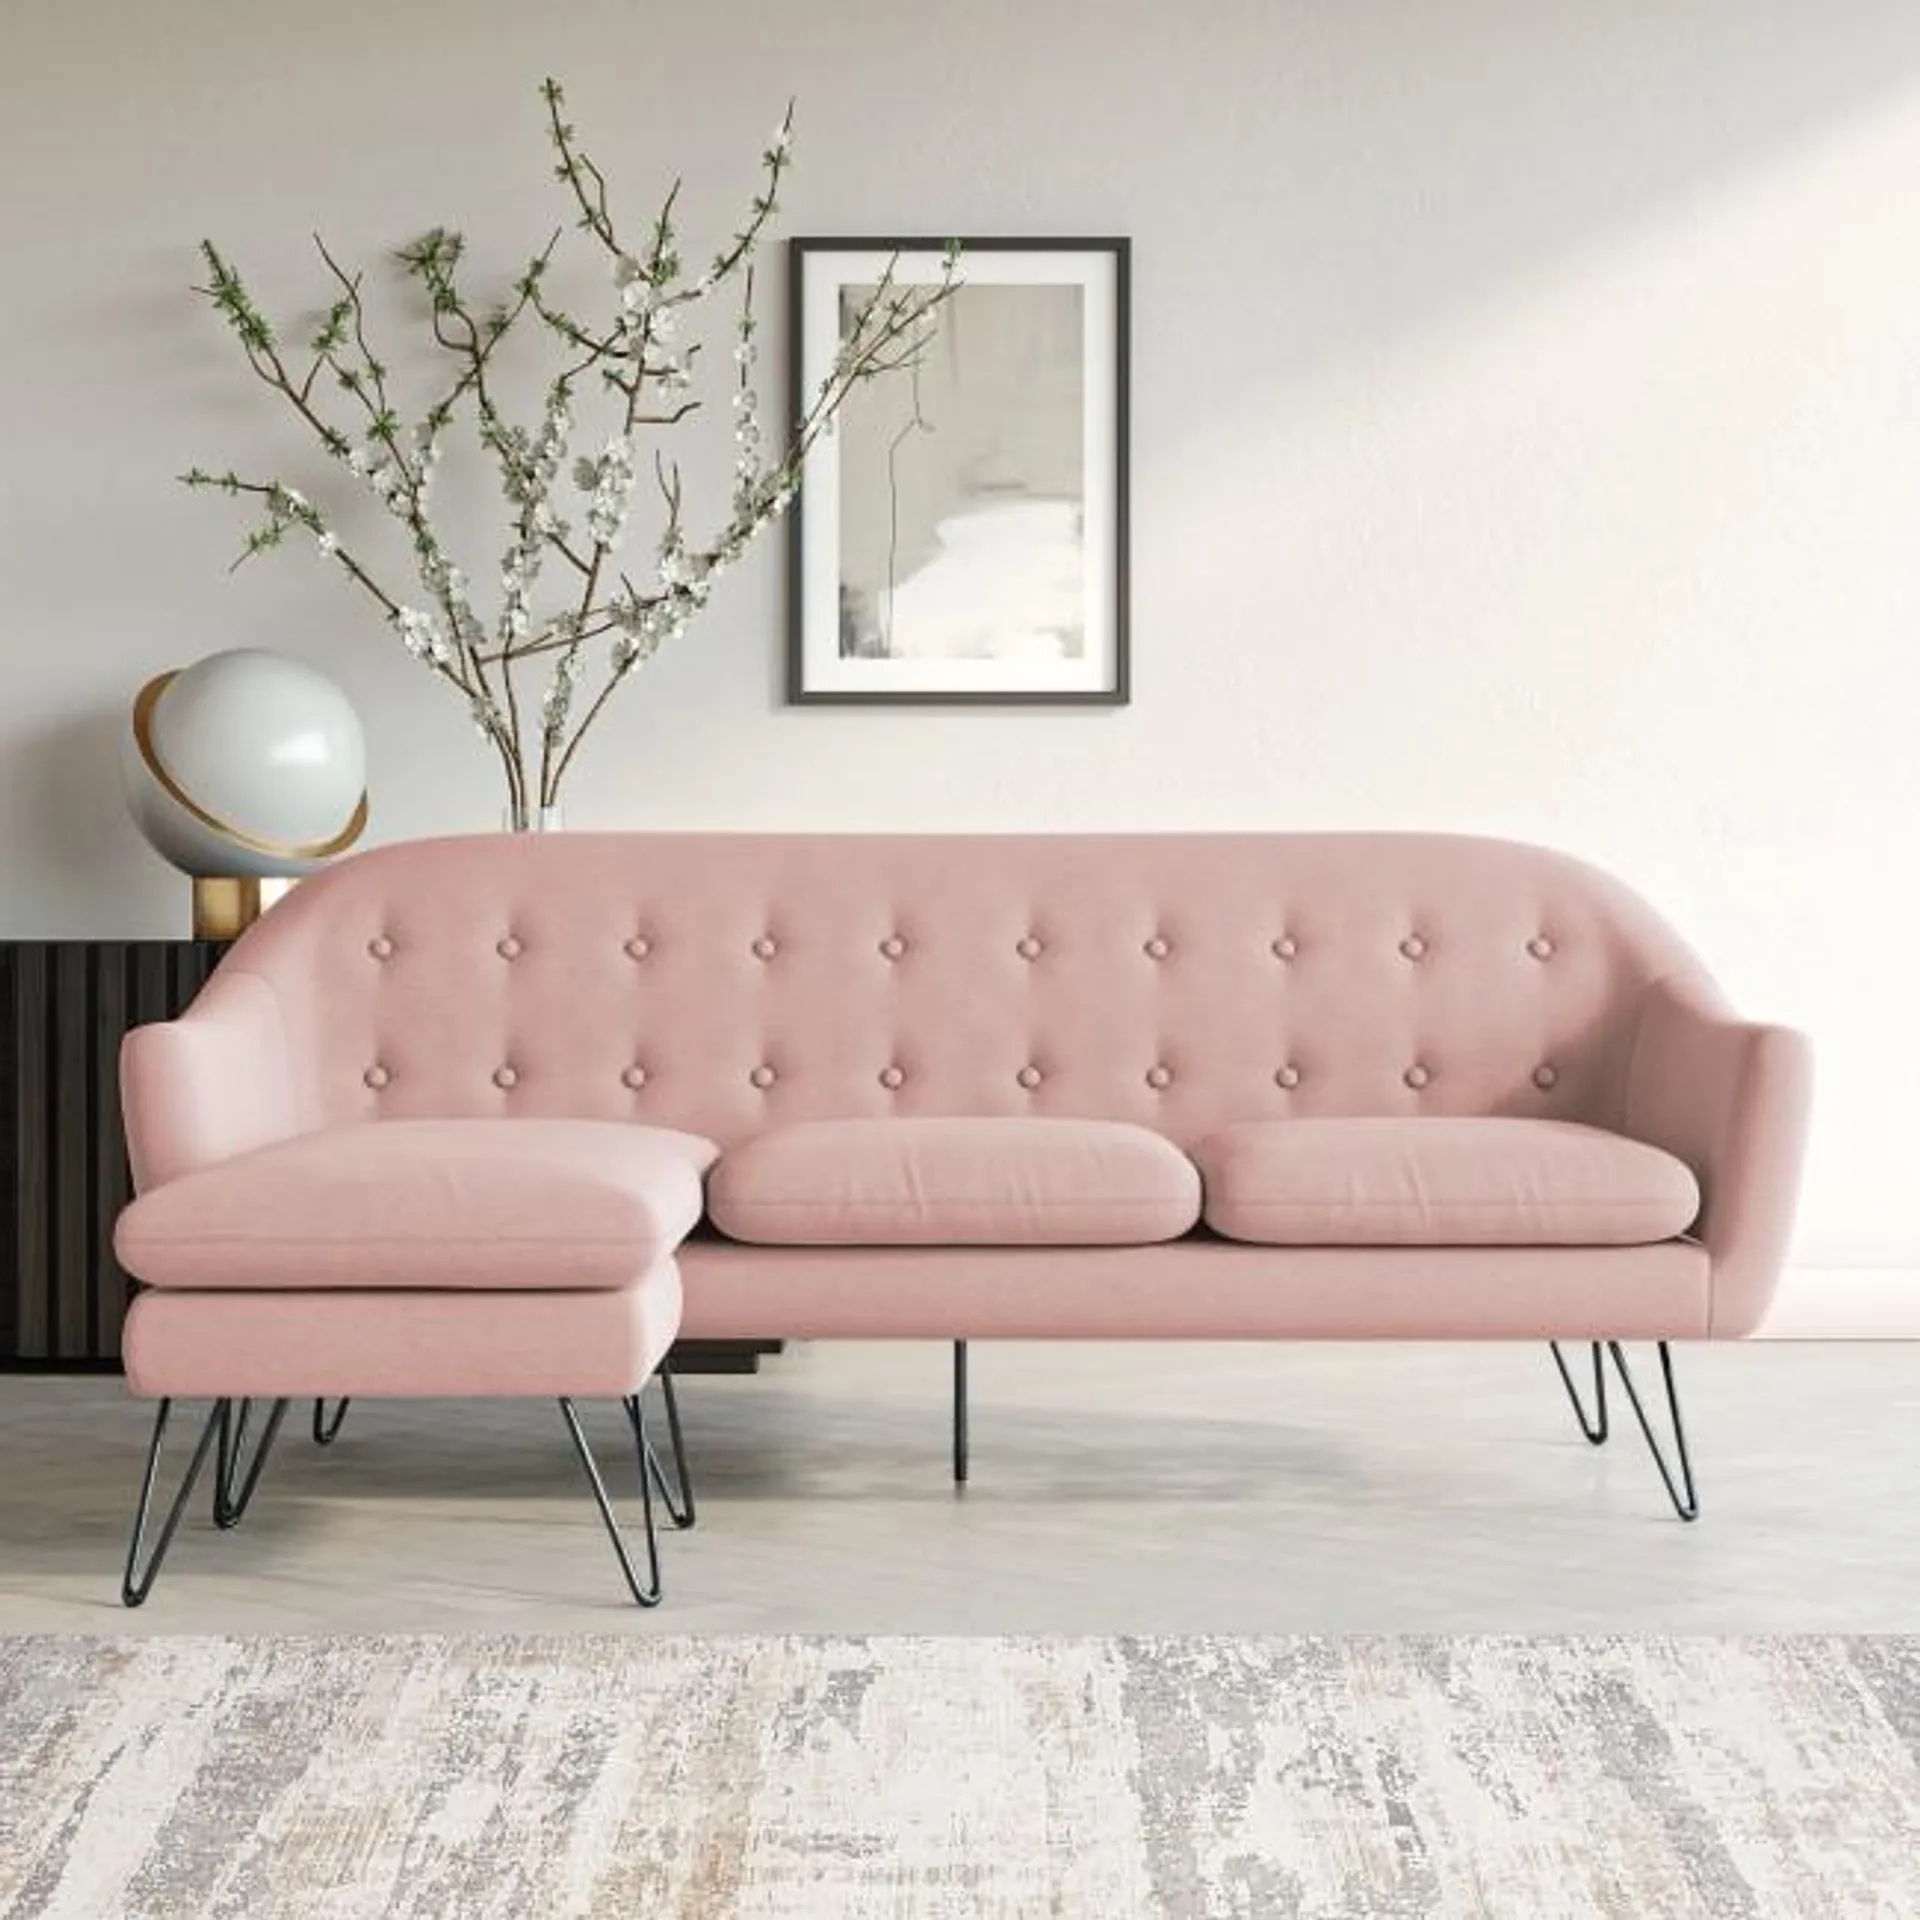 3 Seater Dual Sided L Shaped Sofa in Sage Pink Woven Fabric - Rylee